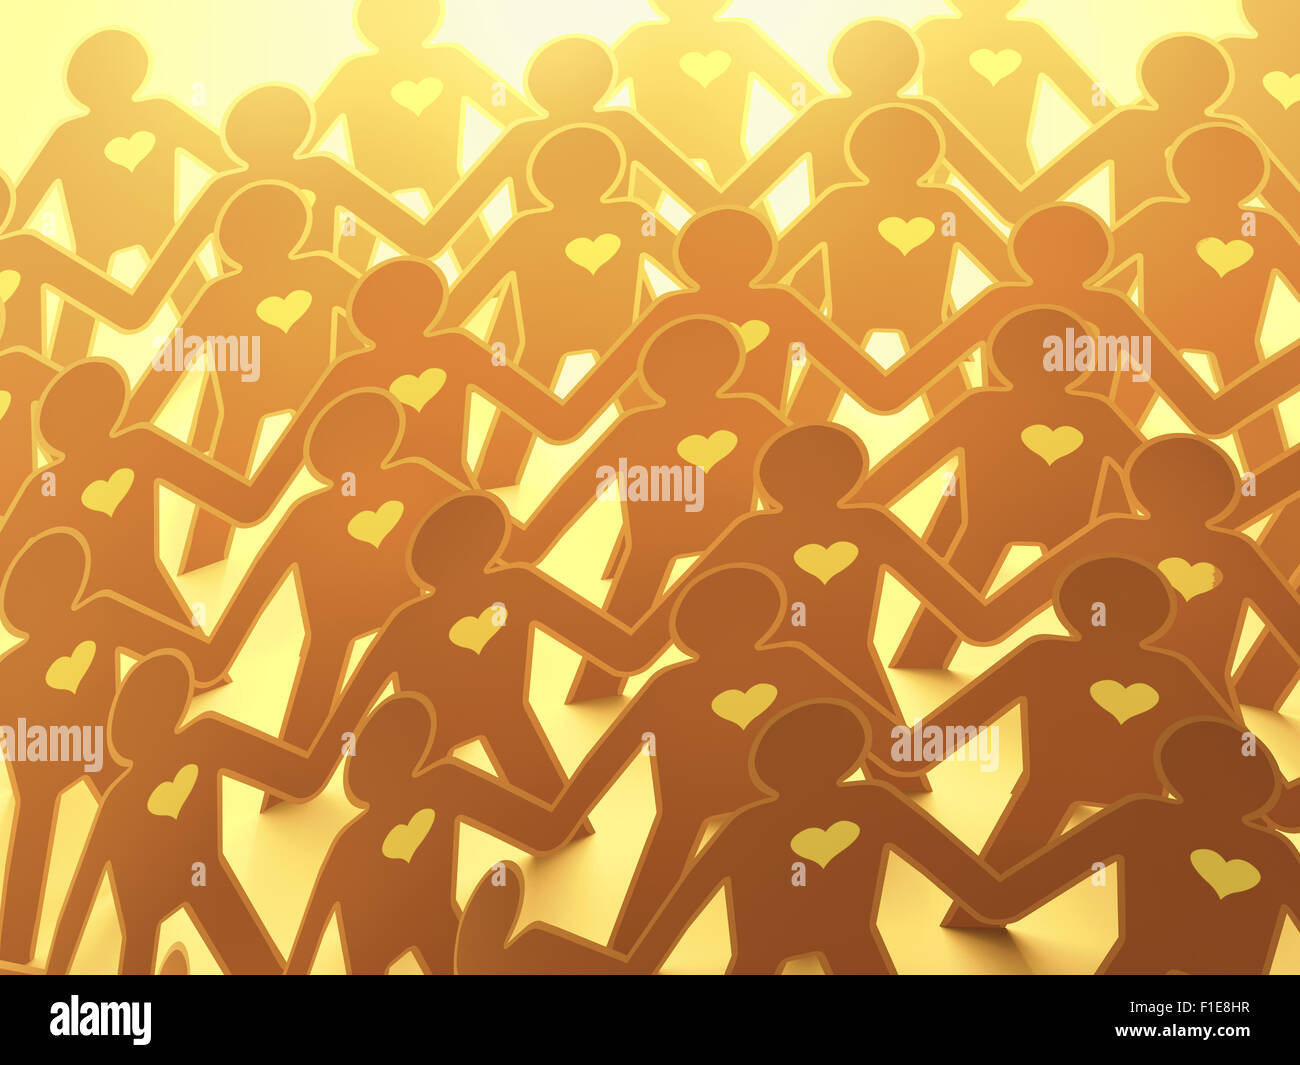 Crowd of people together symbolizing peace and love. Stock Photo